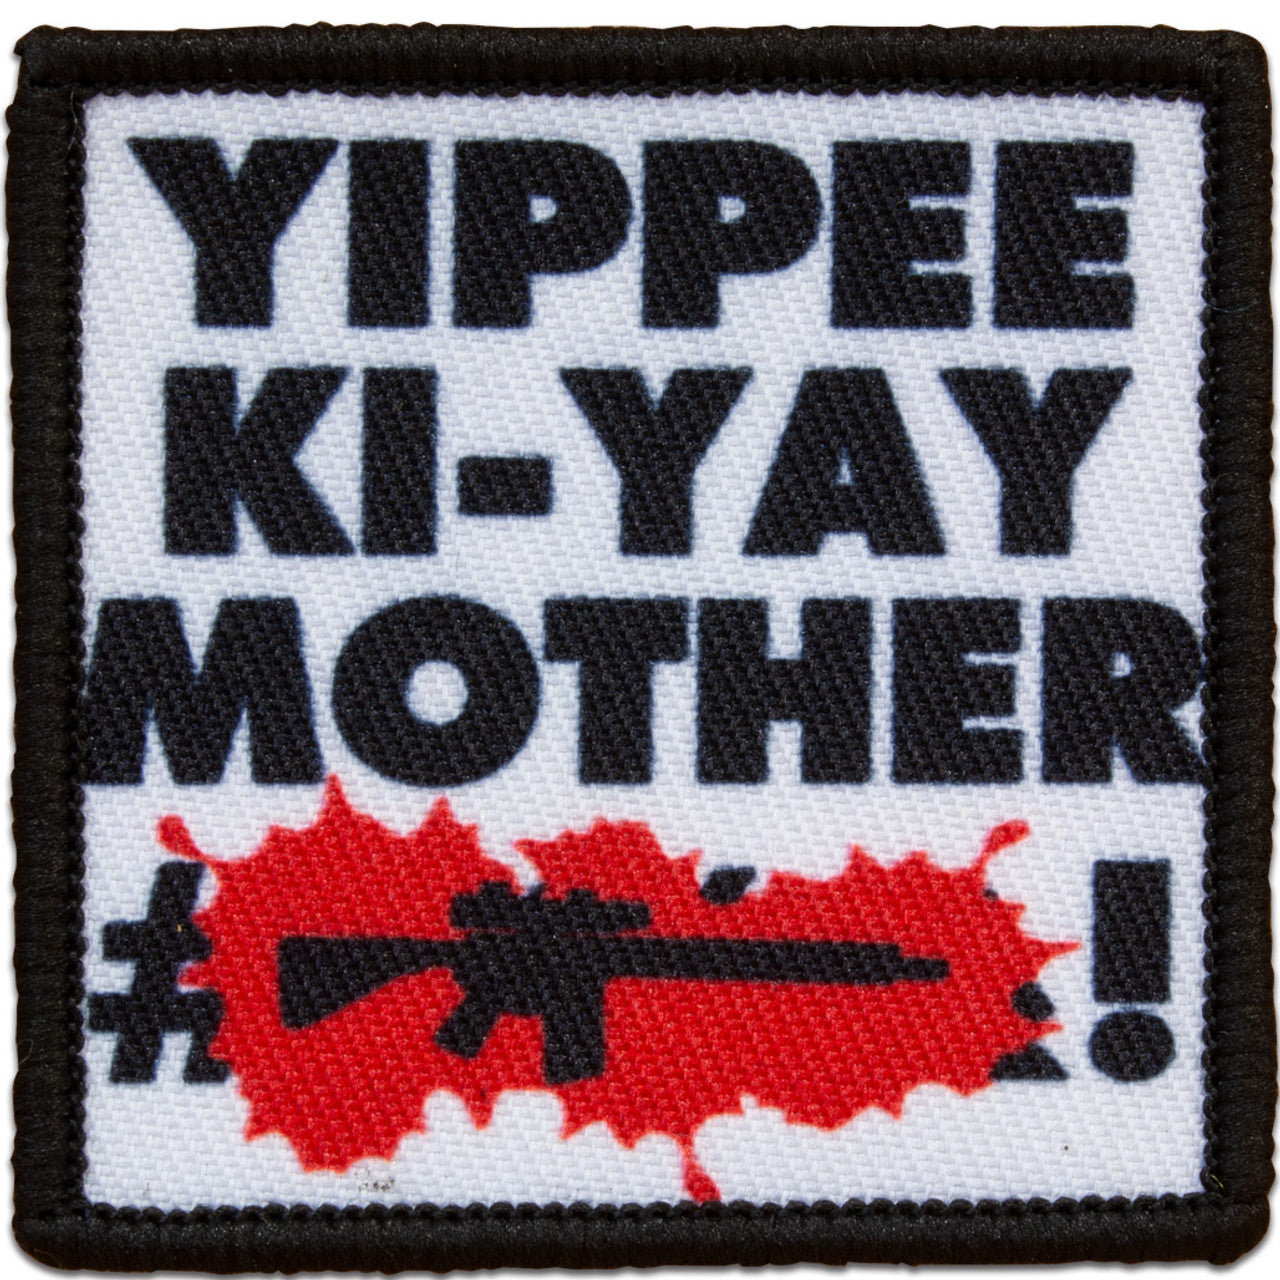 "YIPPEE KI-YAY MOTHER #&**!" MORALE PATCH